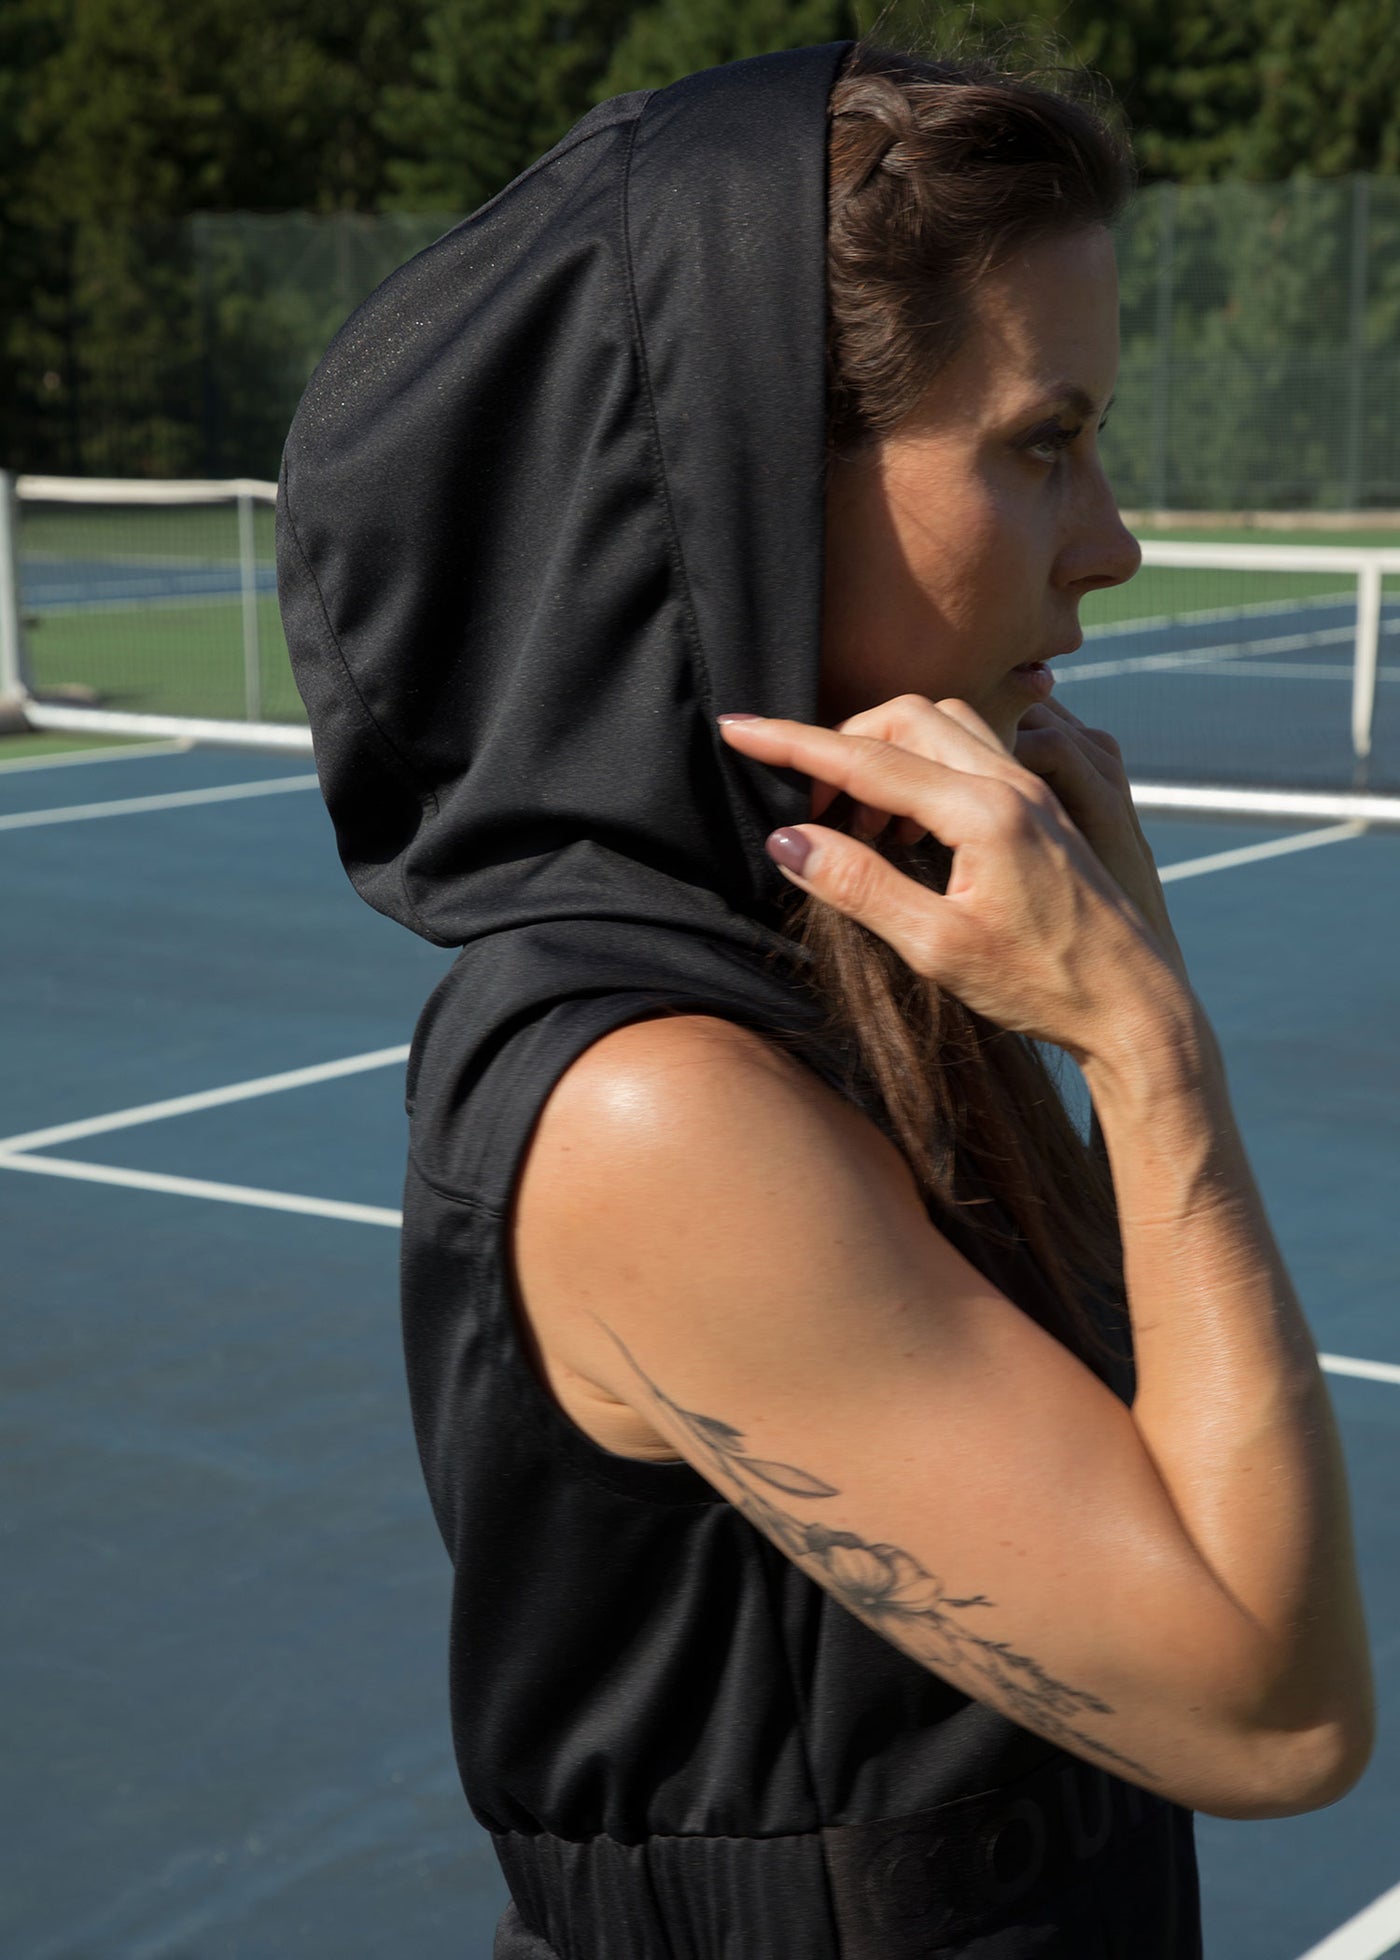 Model wearing tennis vest (with hood up) named after Coco Gauff